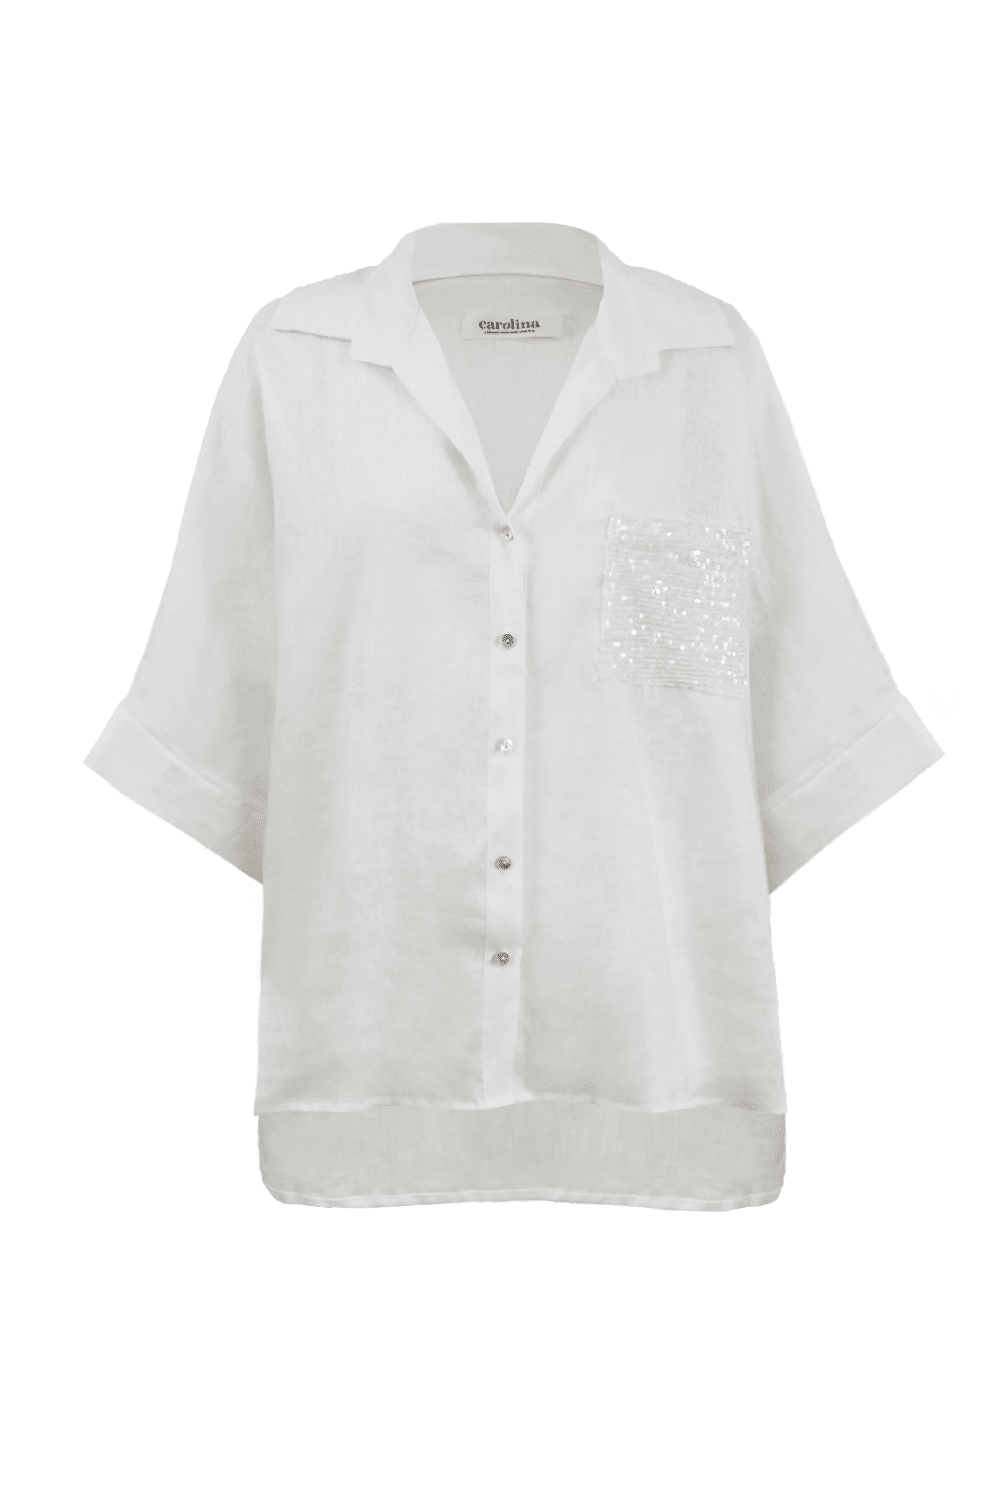 Hartley Collared Shirt White Tops